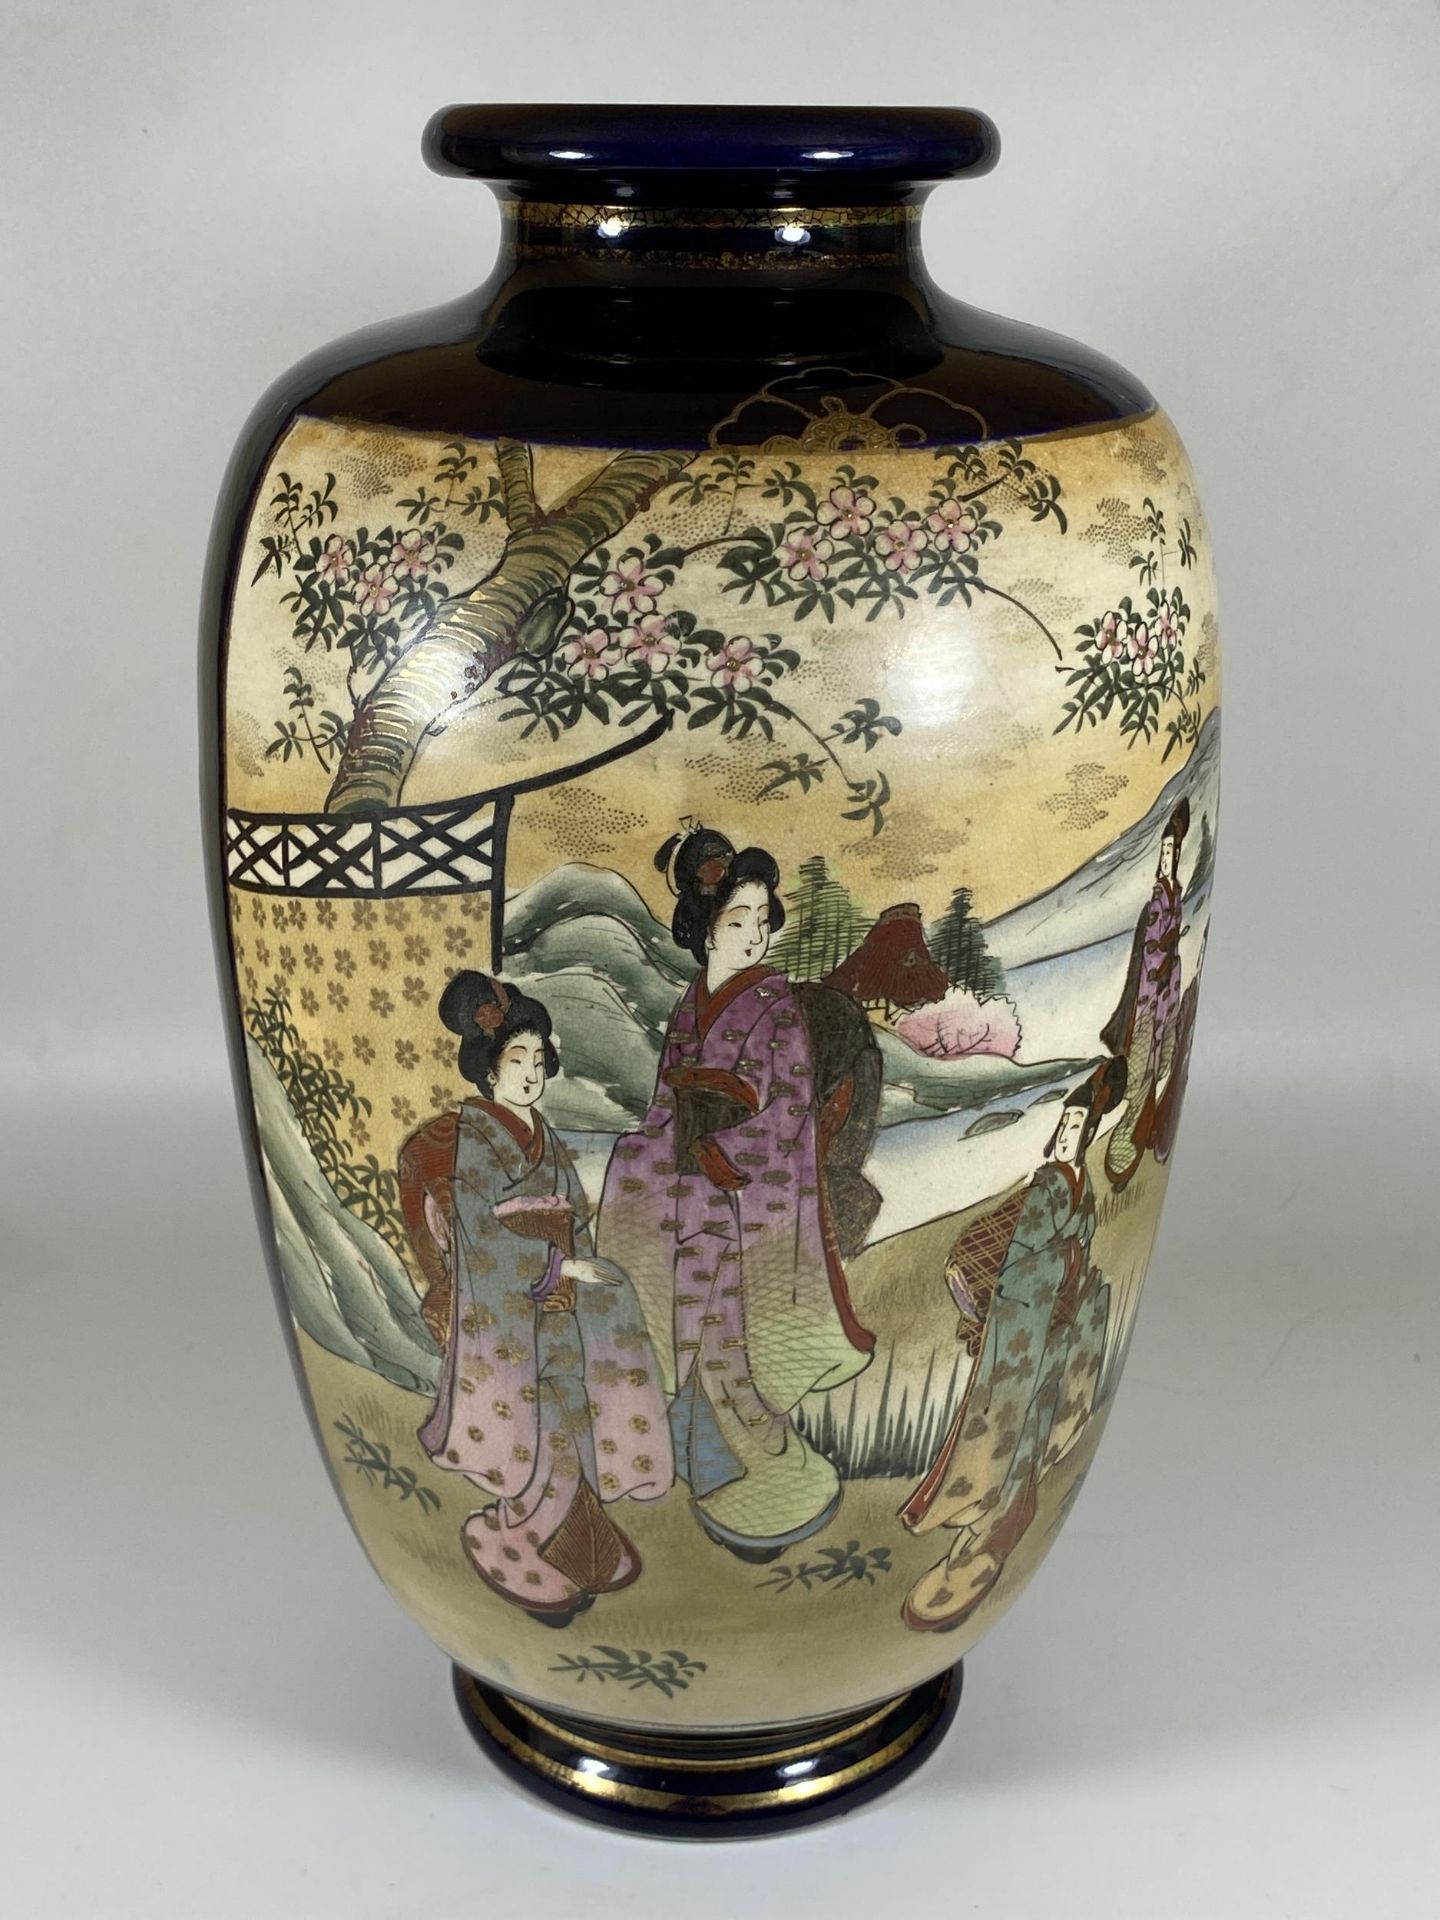 A LARGE JAPANESE HAND PAINTED MEIJI PERIOD VASE, WITH PANELLED DESIGN DEPICTING FIGURES BY A - Image 4 of 6